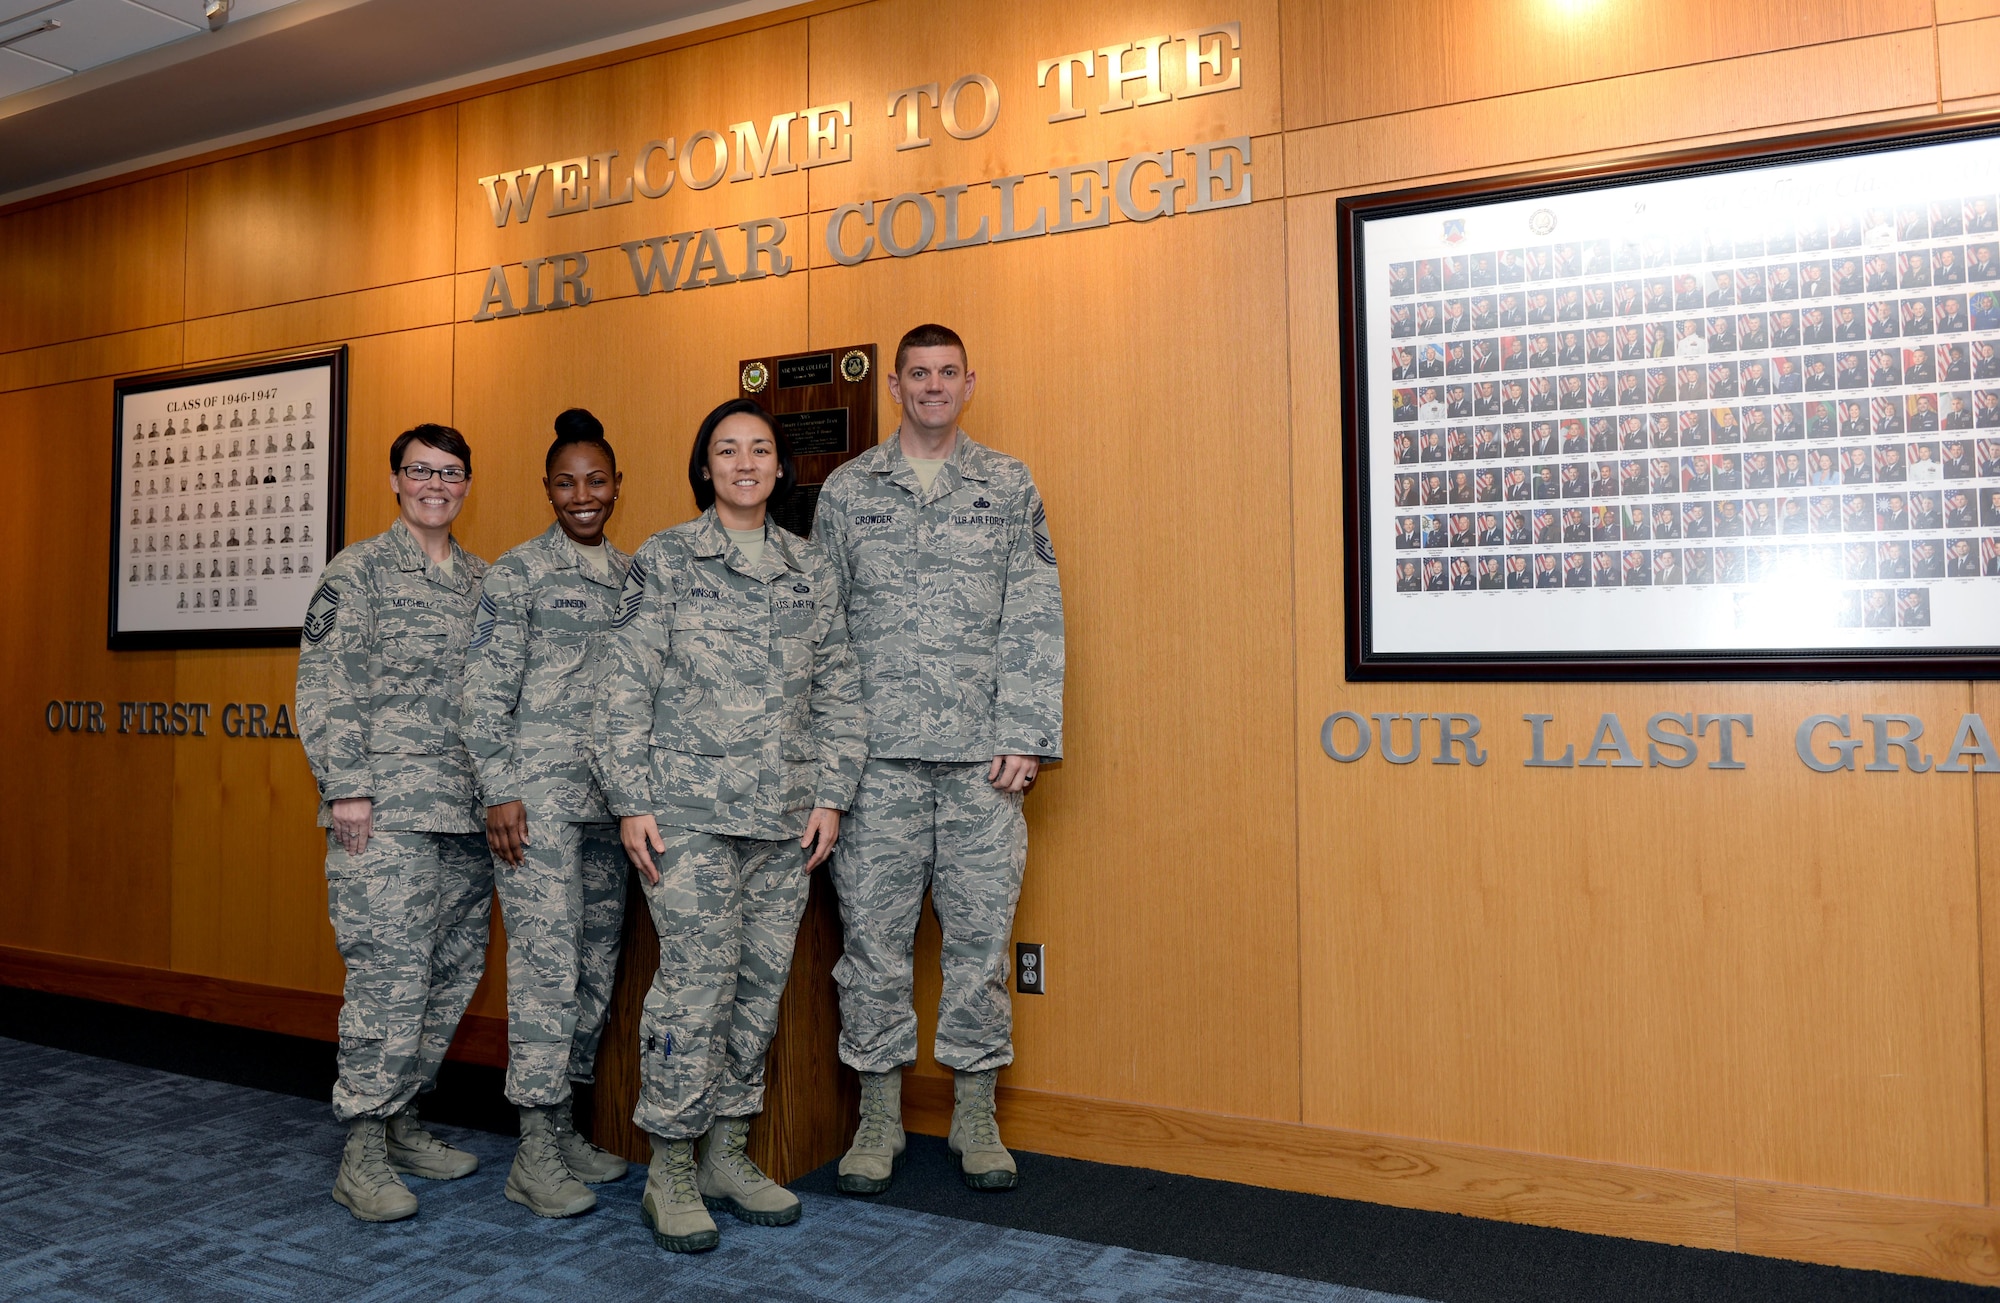 Chief Master Sgts. Amber Mitchell, Shanece Johnson, Kimberly Vinson and Derek Crowder stand in the Air War College lobby at Maxwell Air Force Base, Feb. 23, 2017. They are the first enlisted Airmen to attend the college as in-resident students. (U.S. Air Force photo by Senior Airman Tammie Ramsouer)